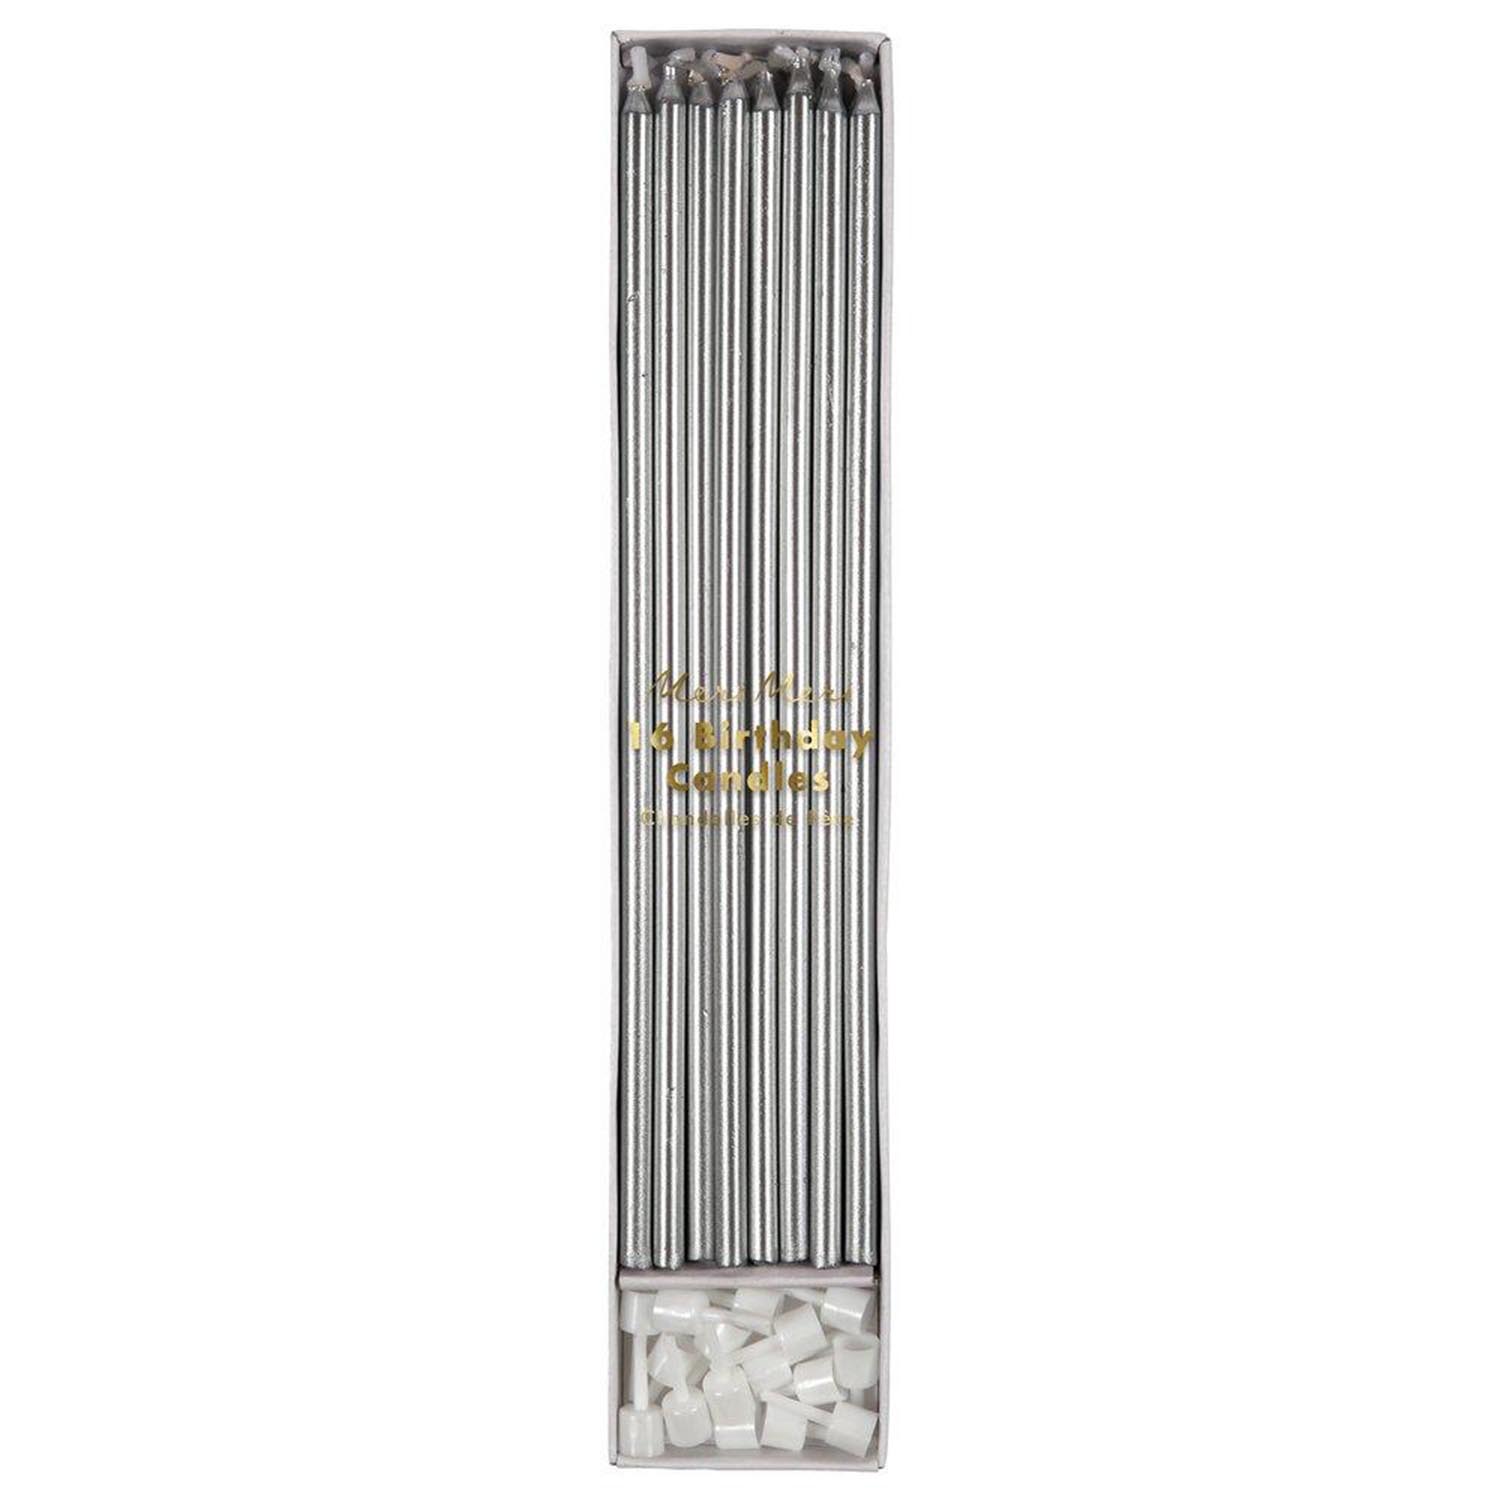 Metallic Silver Tall Party Candles